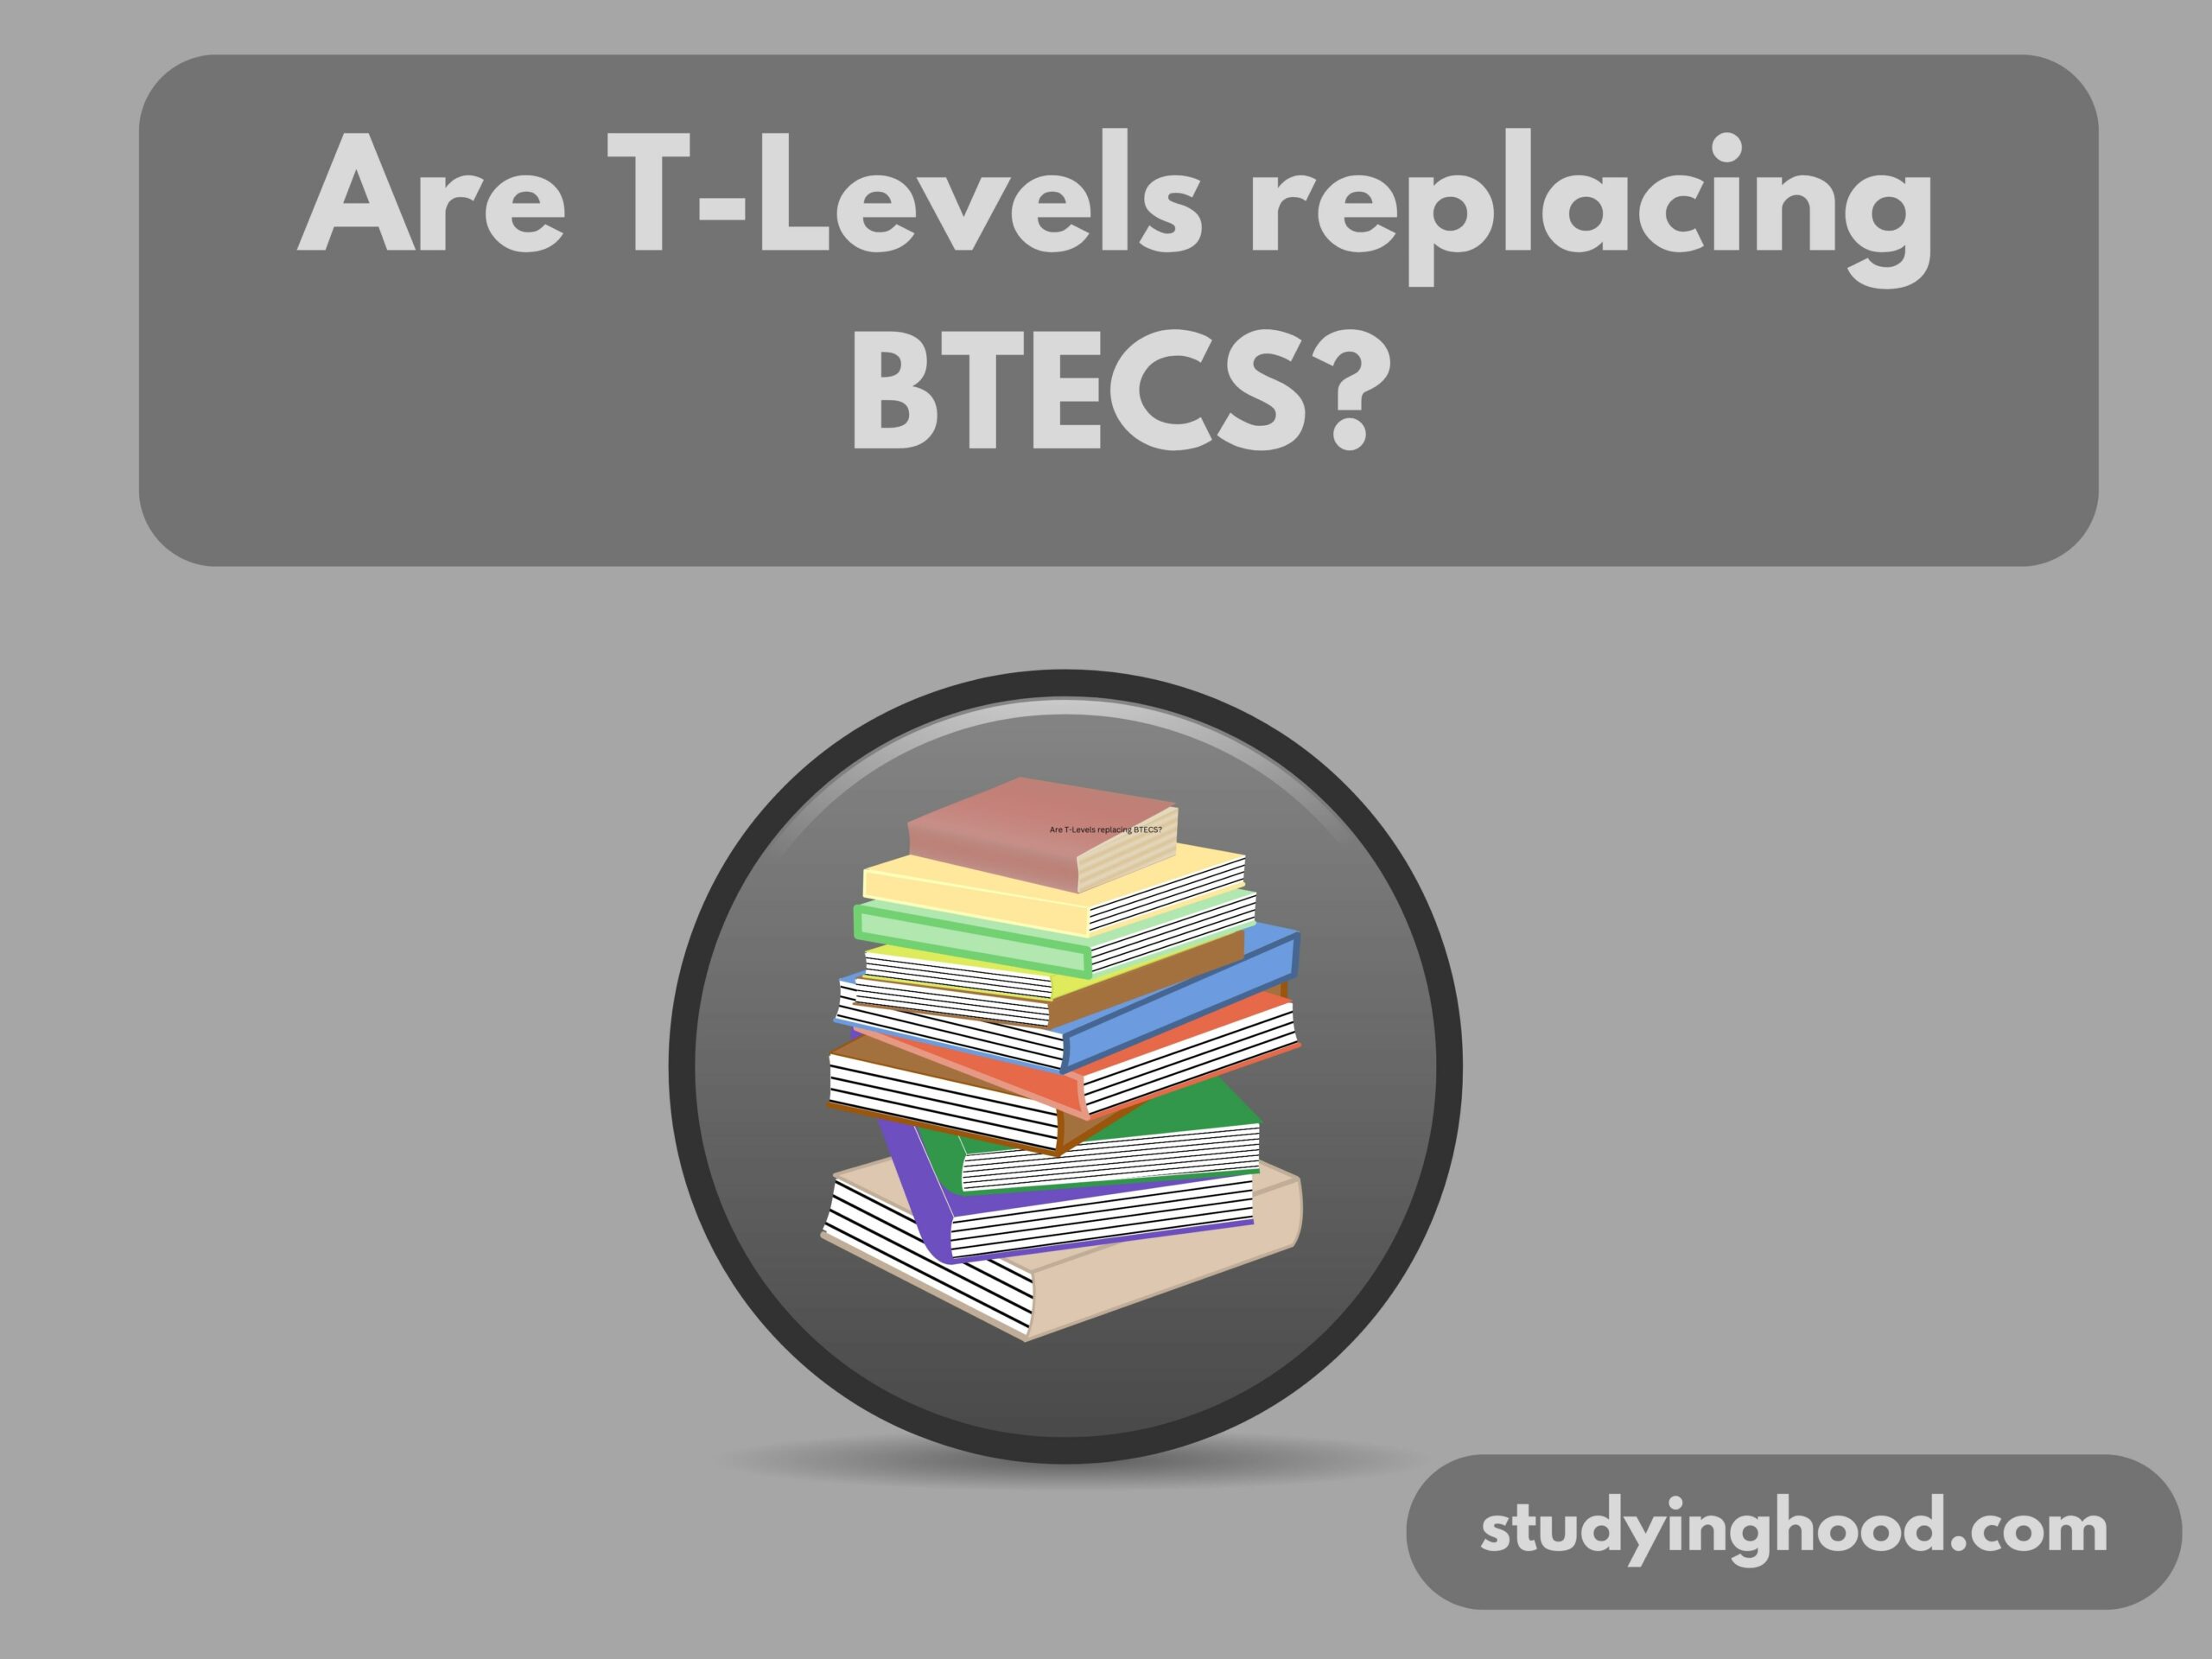 Are T-Levels replacing BTECS?